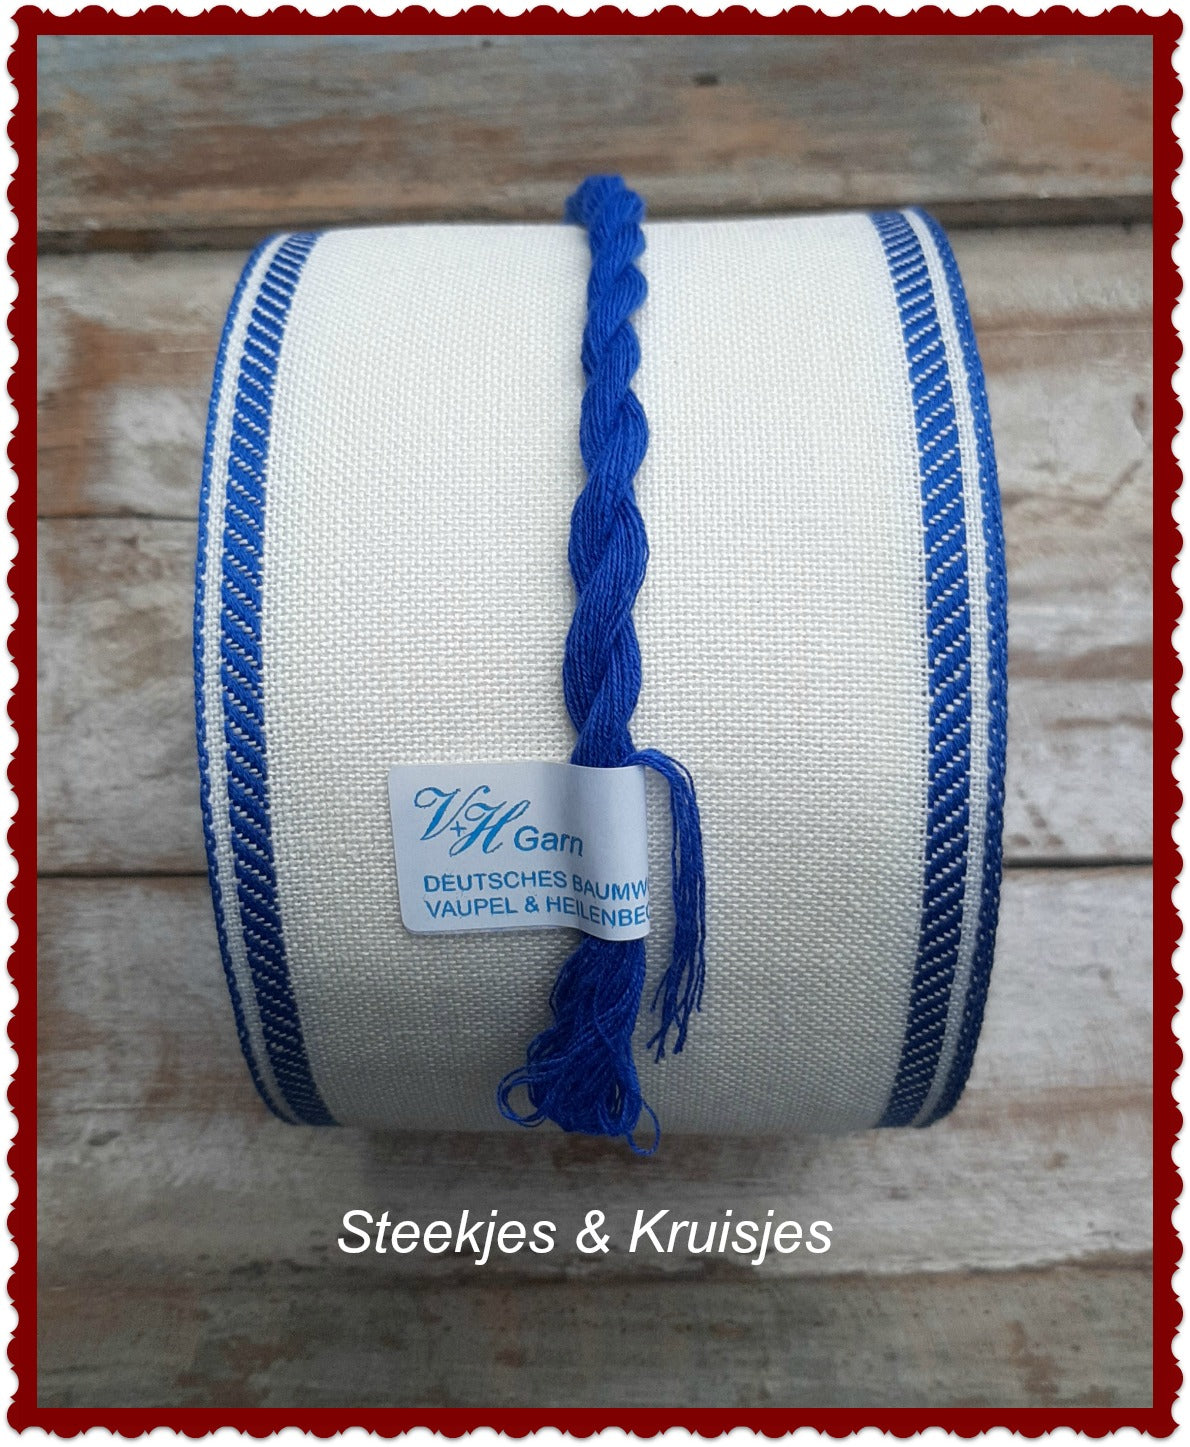 <tc>White Stitching Band With Blue Deco Border Wide 100 mm</tc>